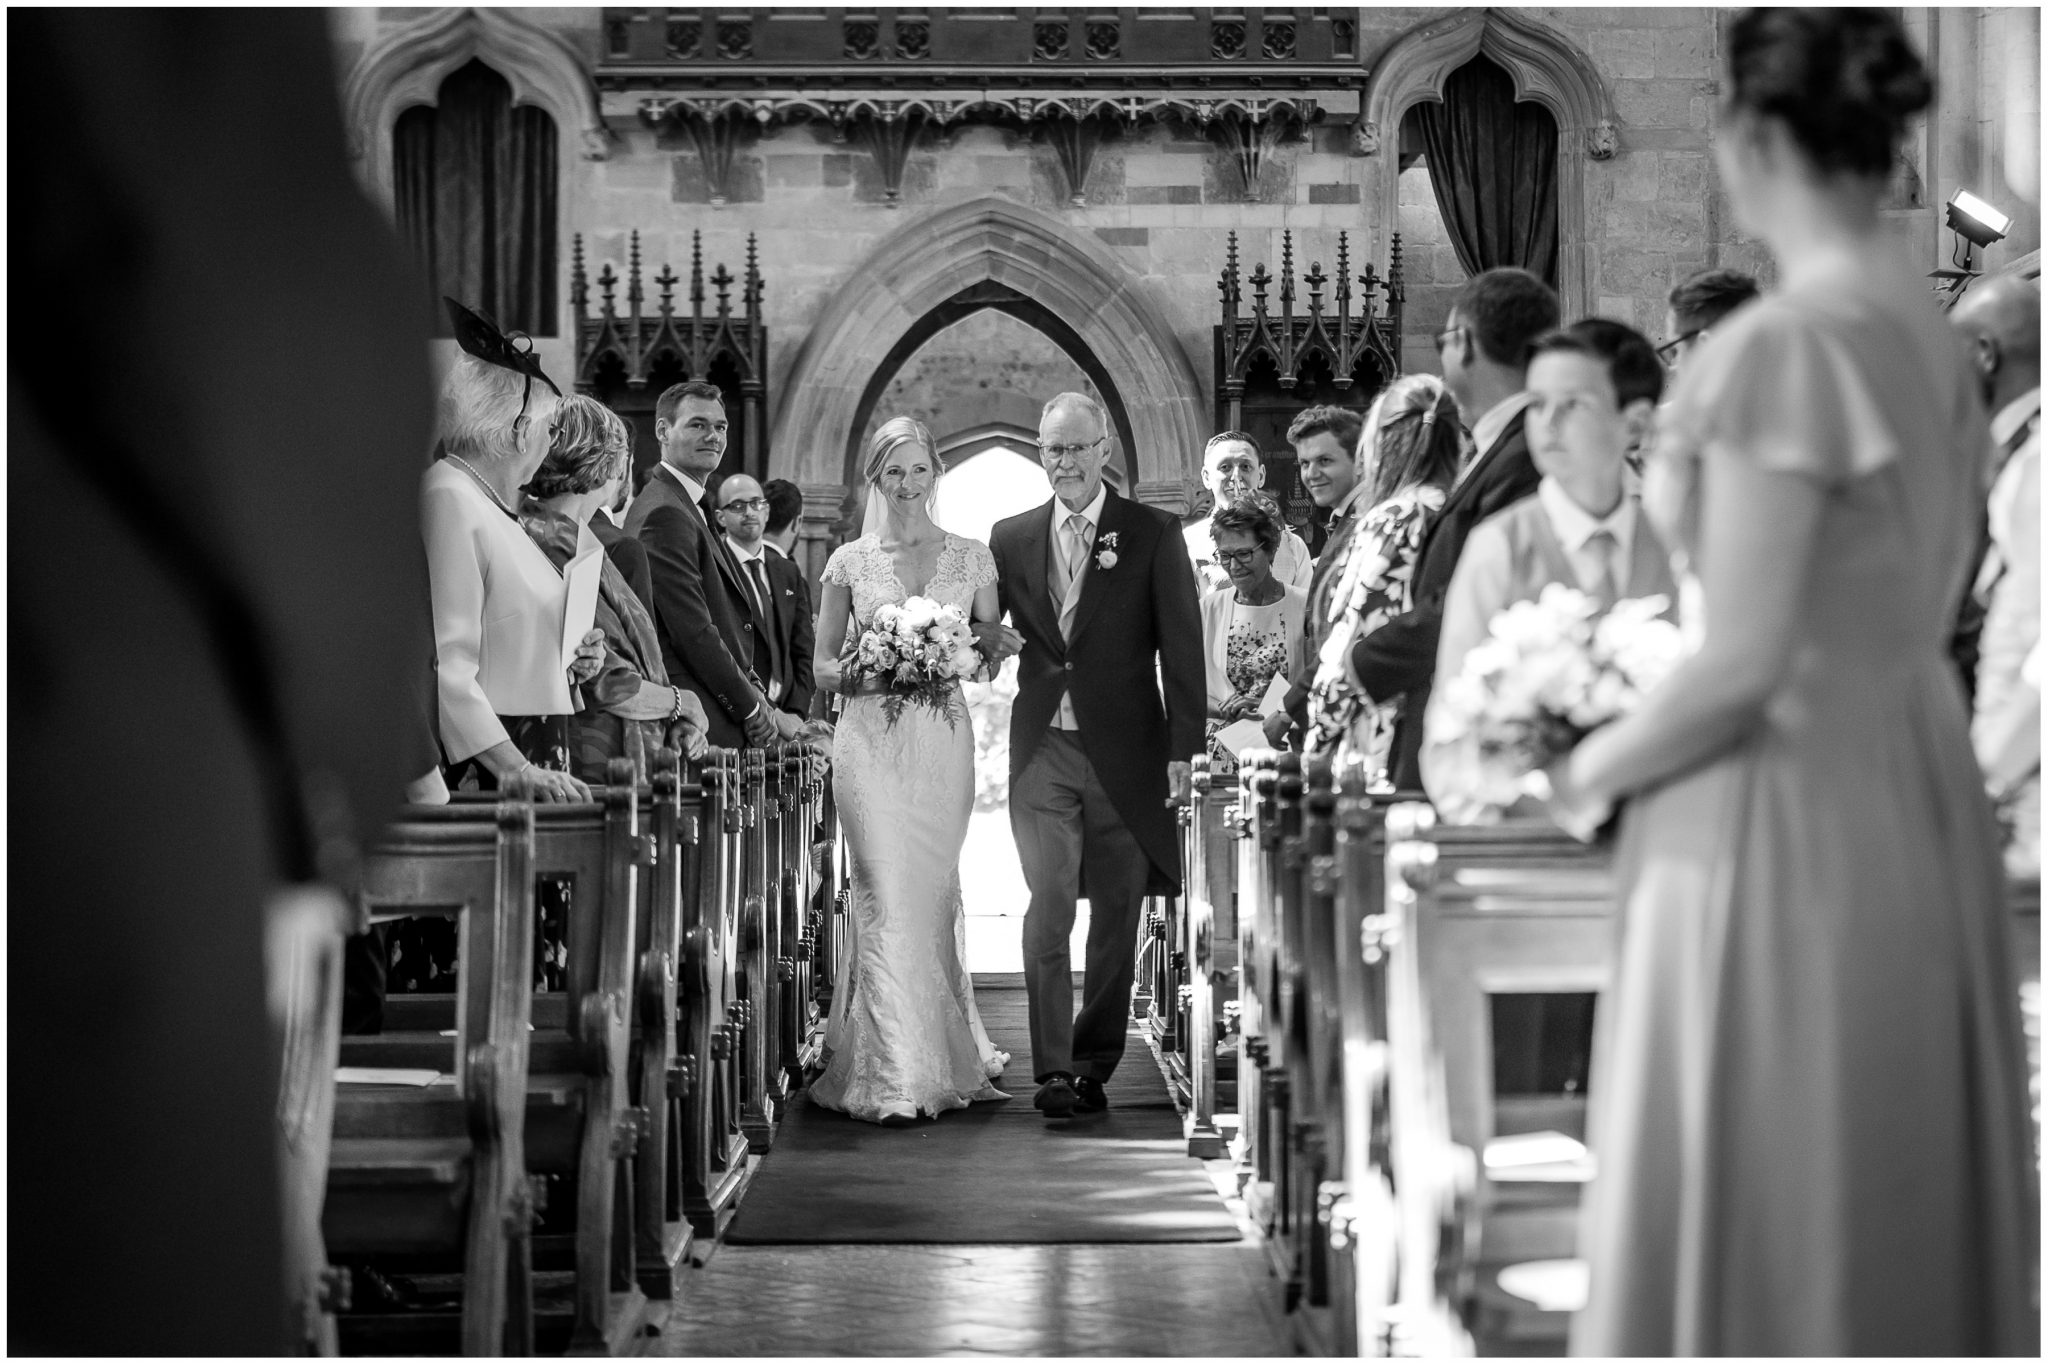 The bride walking down the aisle on her father's arm in a Dorset countryside church